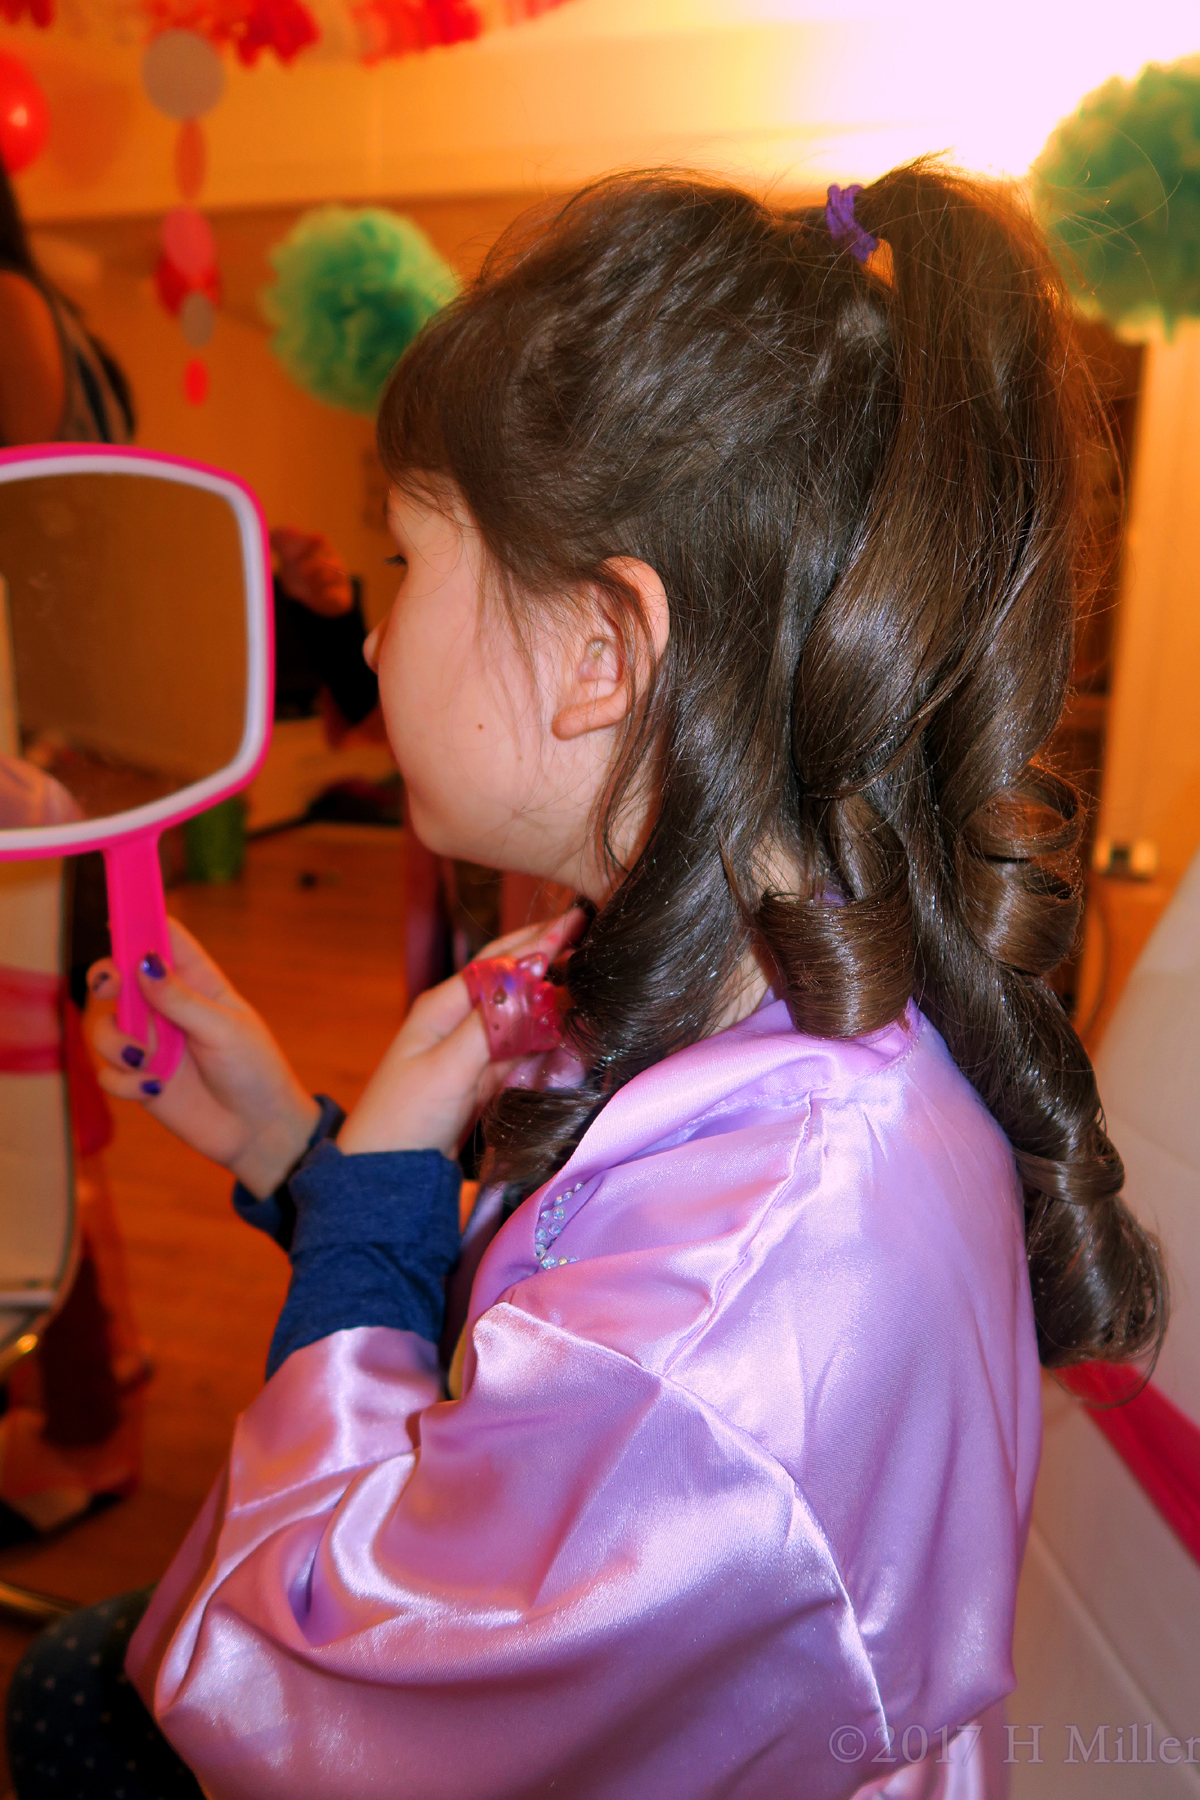 Having A Look Of Her Beautiful Curled Kids Hairstyle In The Mirror! 